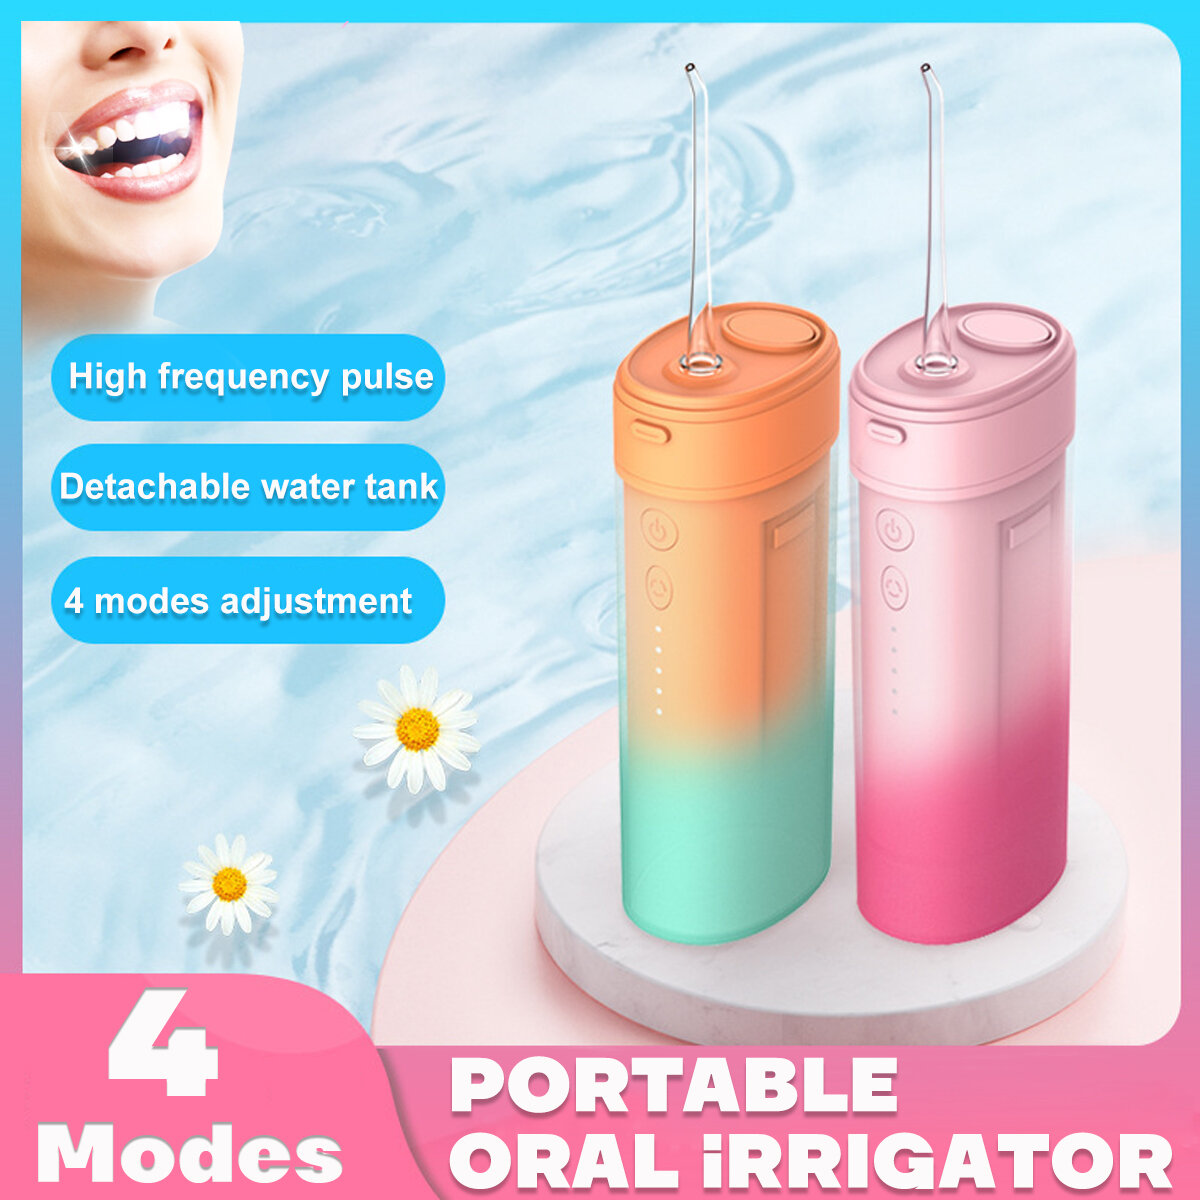 Bakeey Oral Irrigator Hand-held Portable Electric Tooth Cleaner 160ml Capacity IPX6 Waterproof Automatic Power Off Water